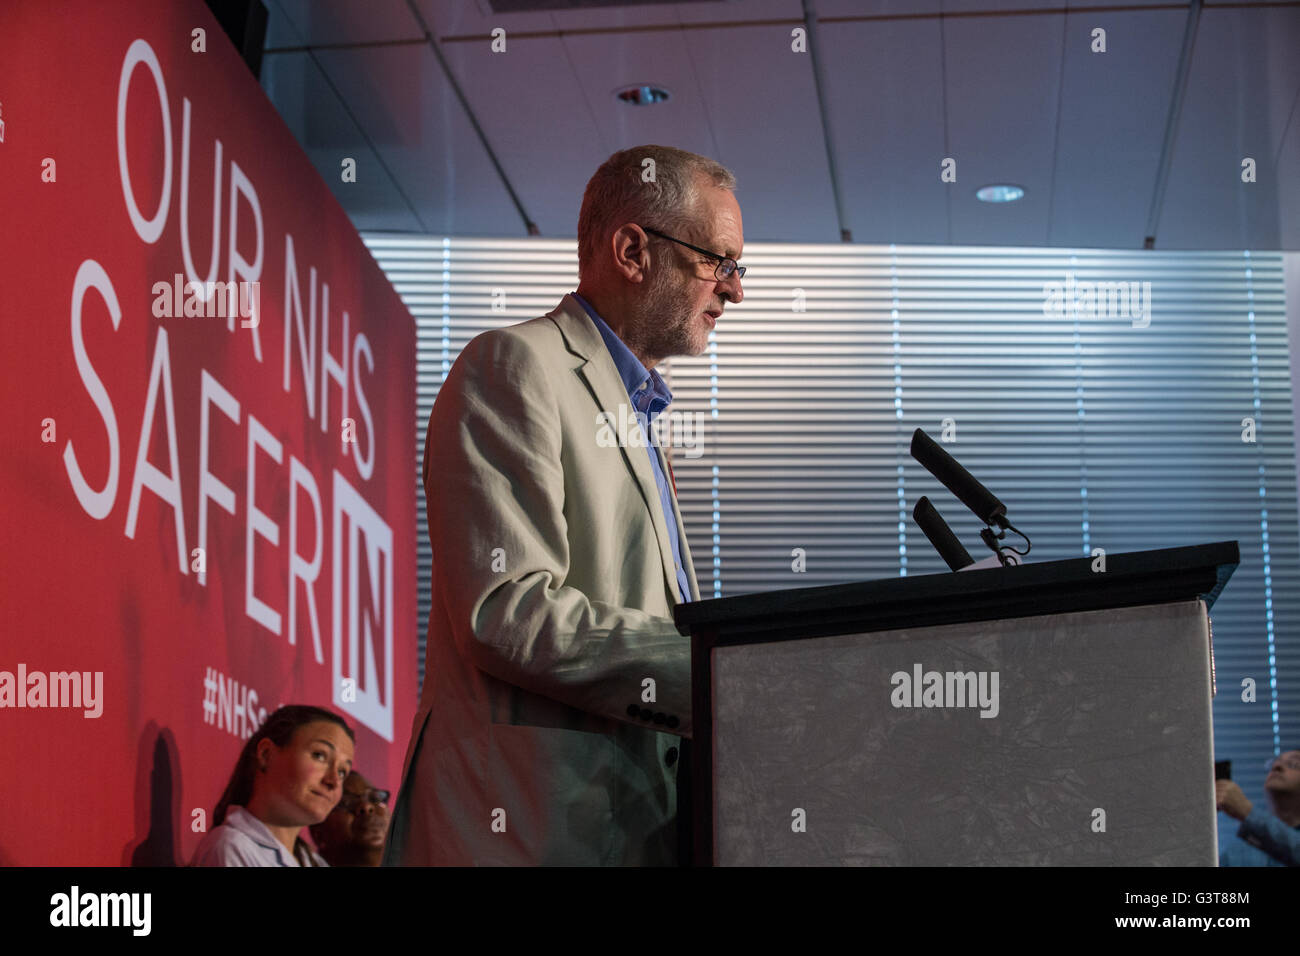 London, UK. 14th June, 2016. Jeremy Corbyn, Leader of the Labour Party and the Opposition, speaks in favour of the Vote Remain campaign at the TUC headquarters. He urged Labour supporters to vote Remain in order to ‘support, defend and protect the NHS'. Credit:  Mark Kerrison/Alamy Live News Stock Photo